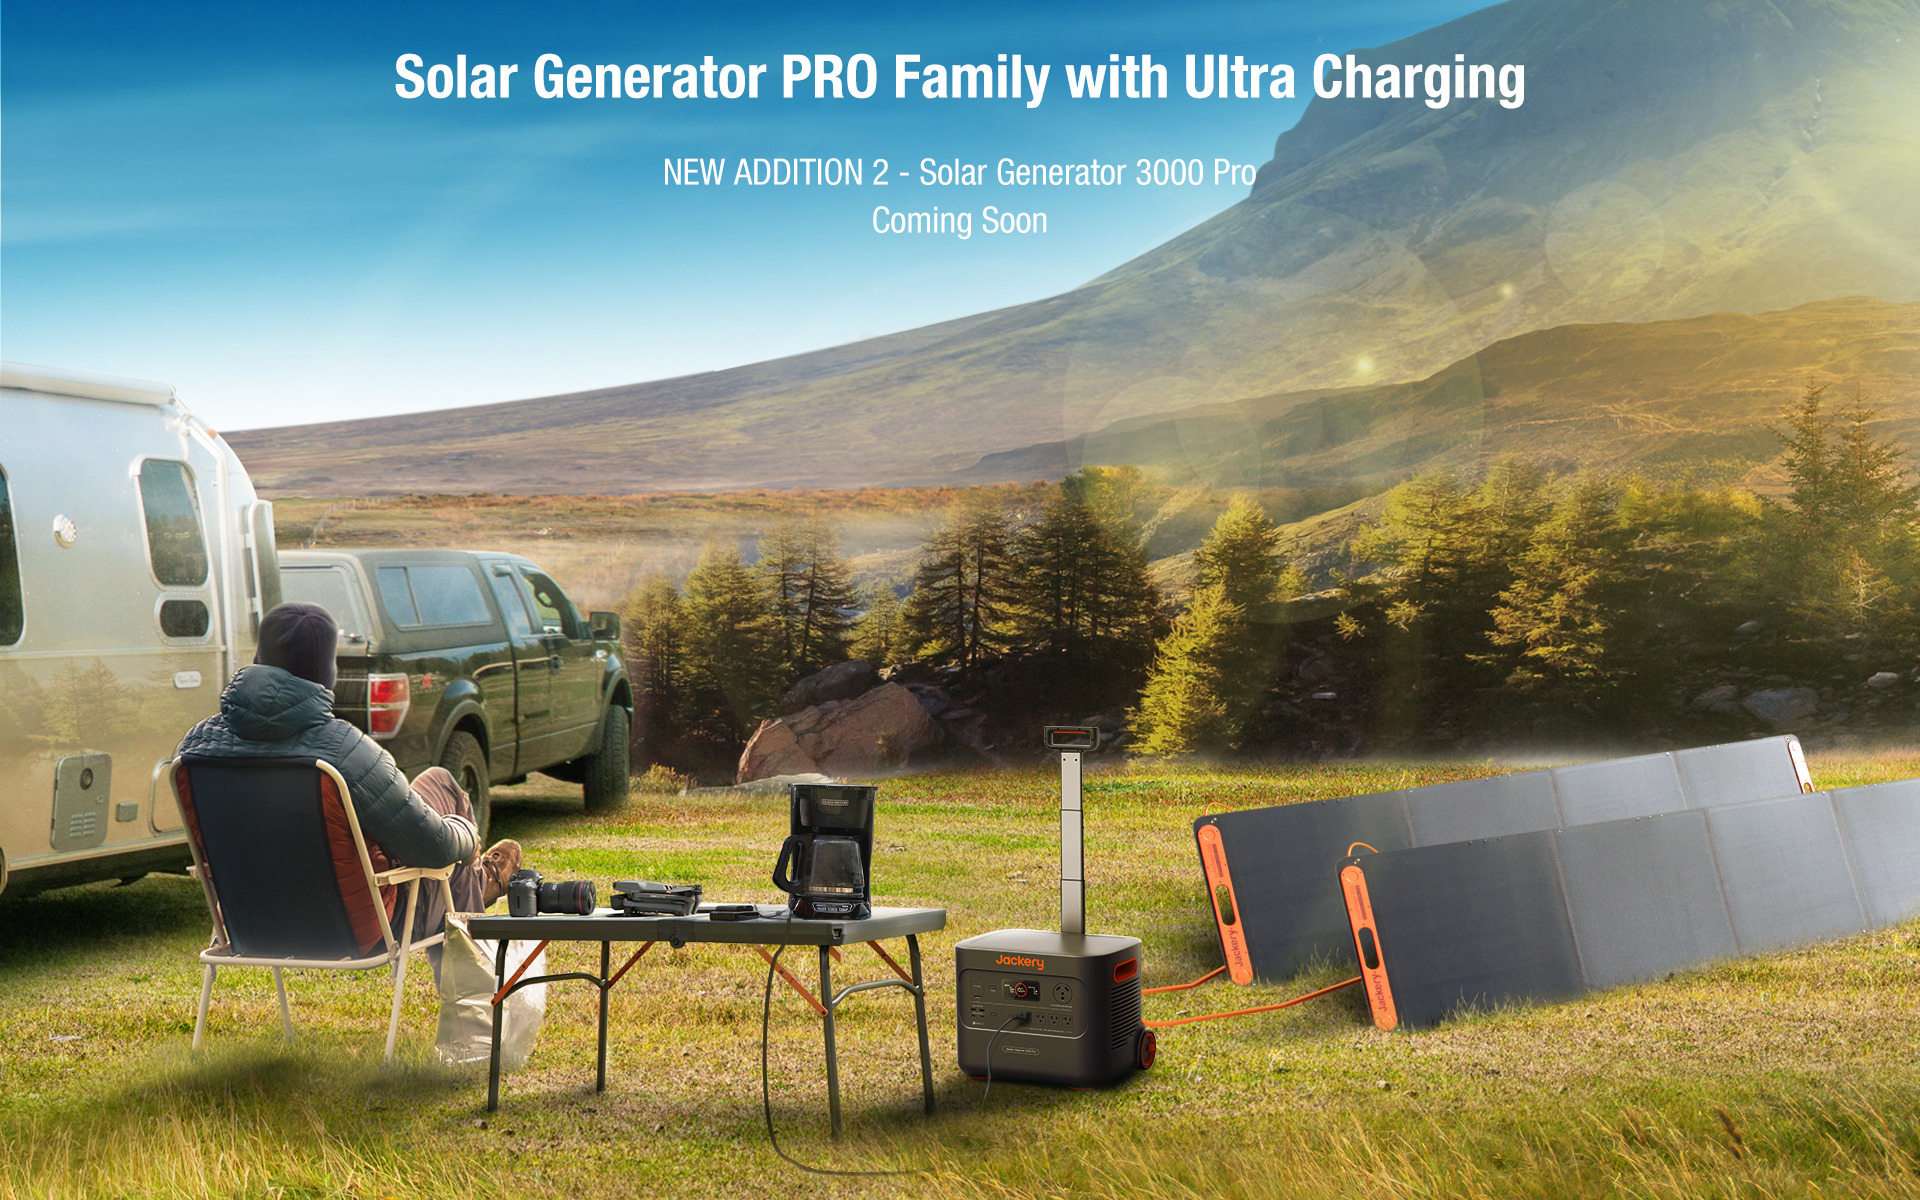 Jackery Explorer 1500 and 3000 Pro launch as new outdoorsy power solutions with Ultra Charging thumbnail